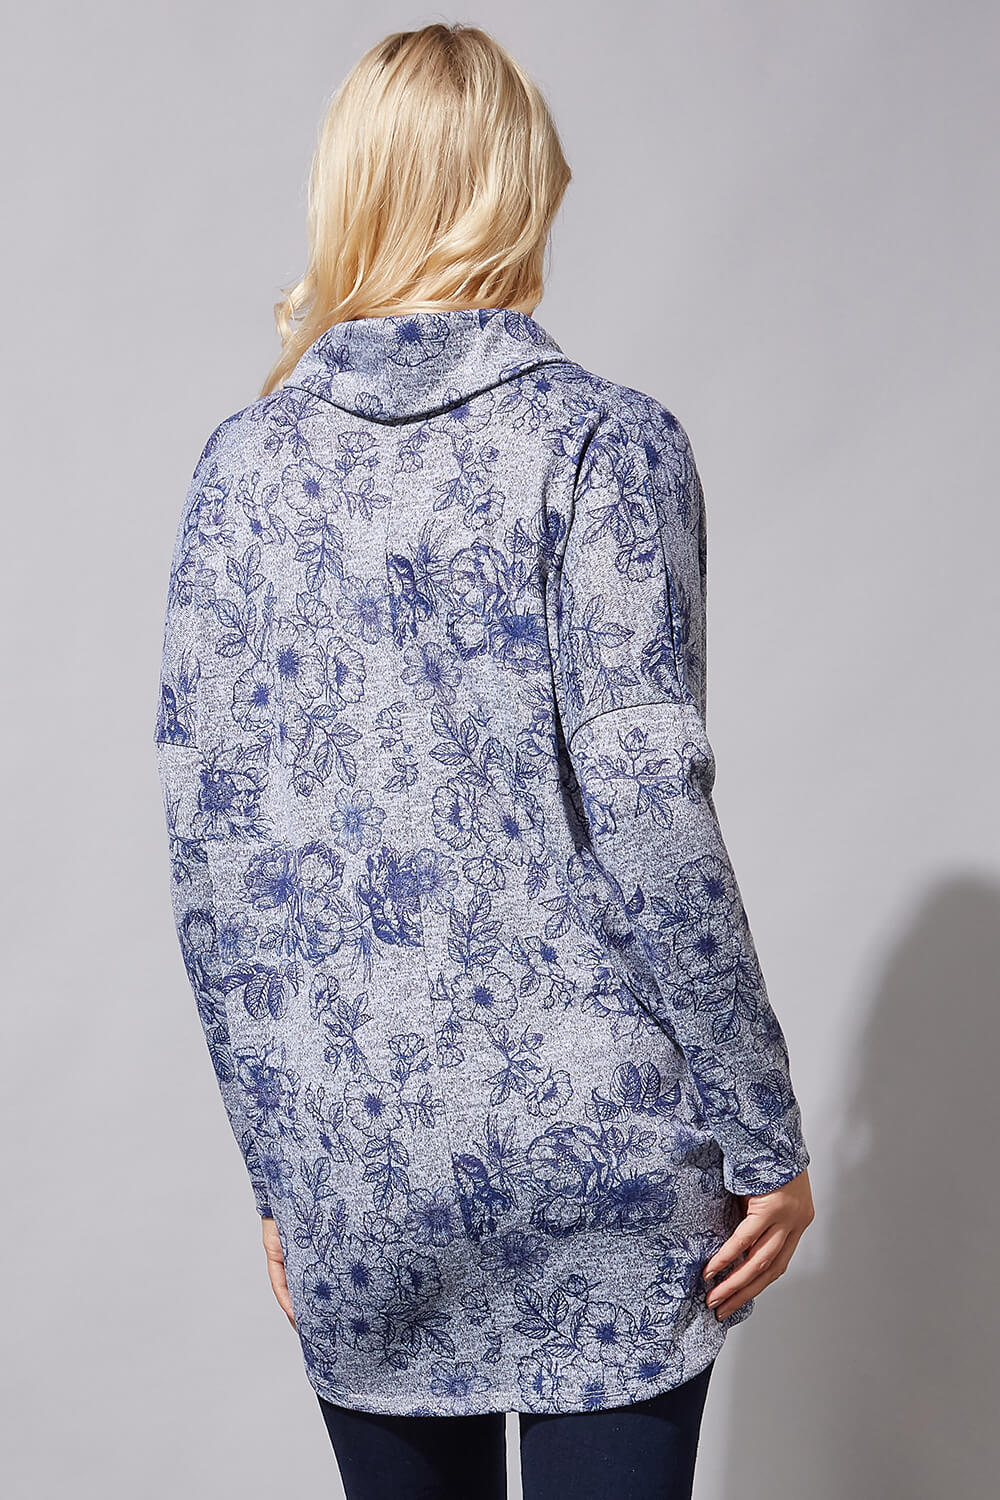 Grey Floral Print Cowl Neck Top, Image 4 of 4